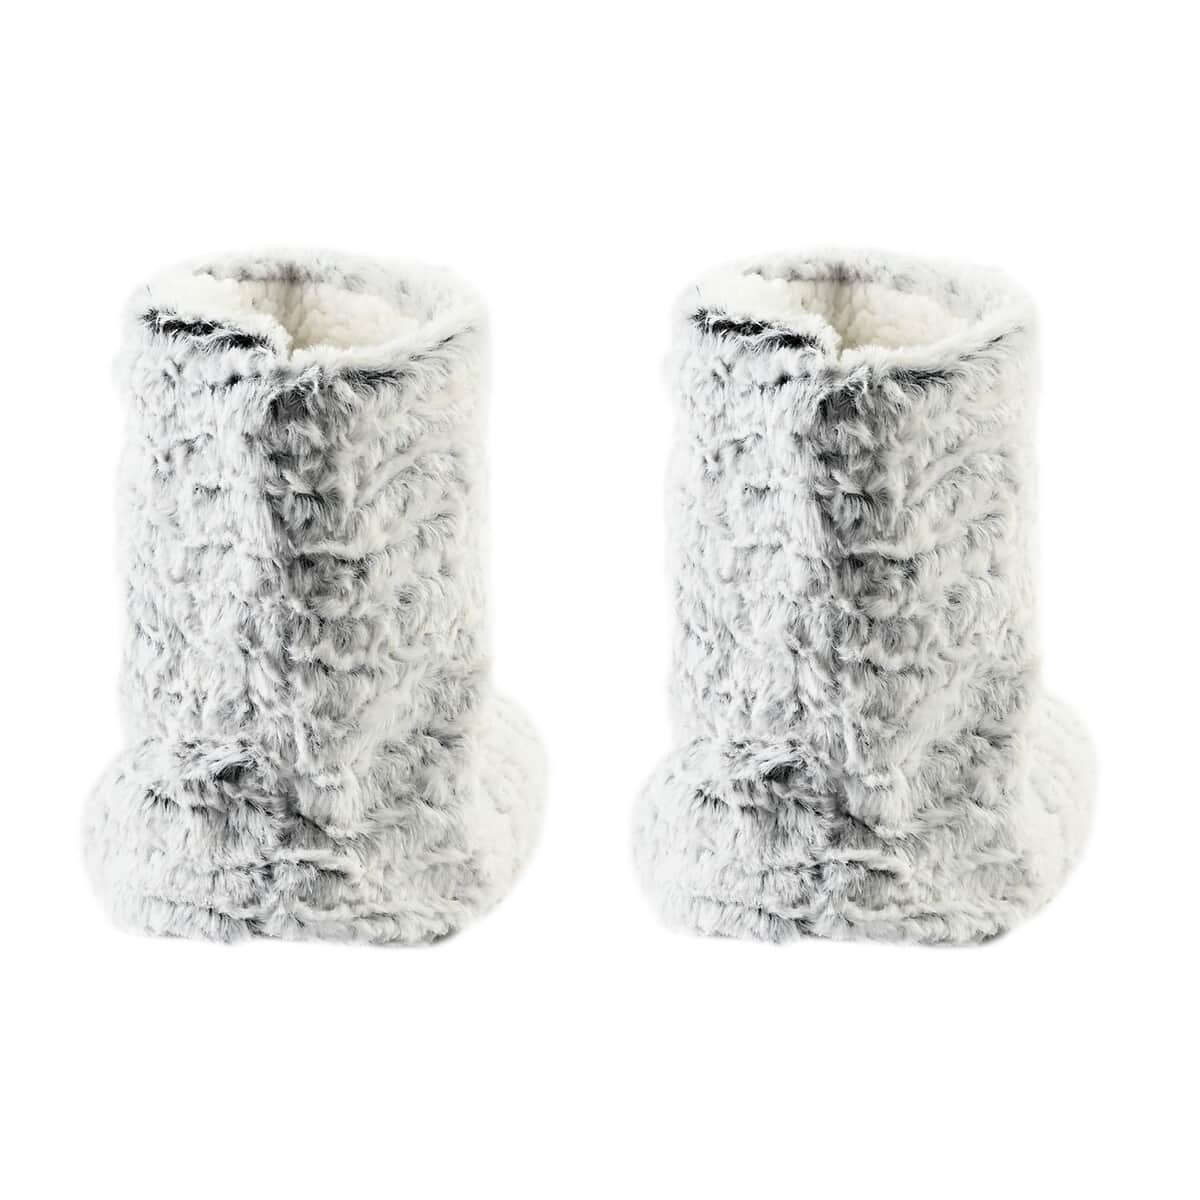 Homesmart Gray Microfiber Faux Fur, Sherpa Booties and Matching Ballerina Slippers (Women's Size 5-10) image number 3